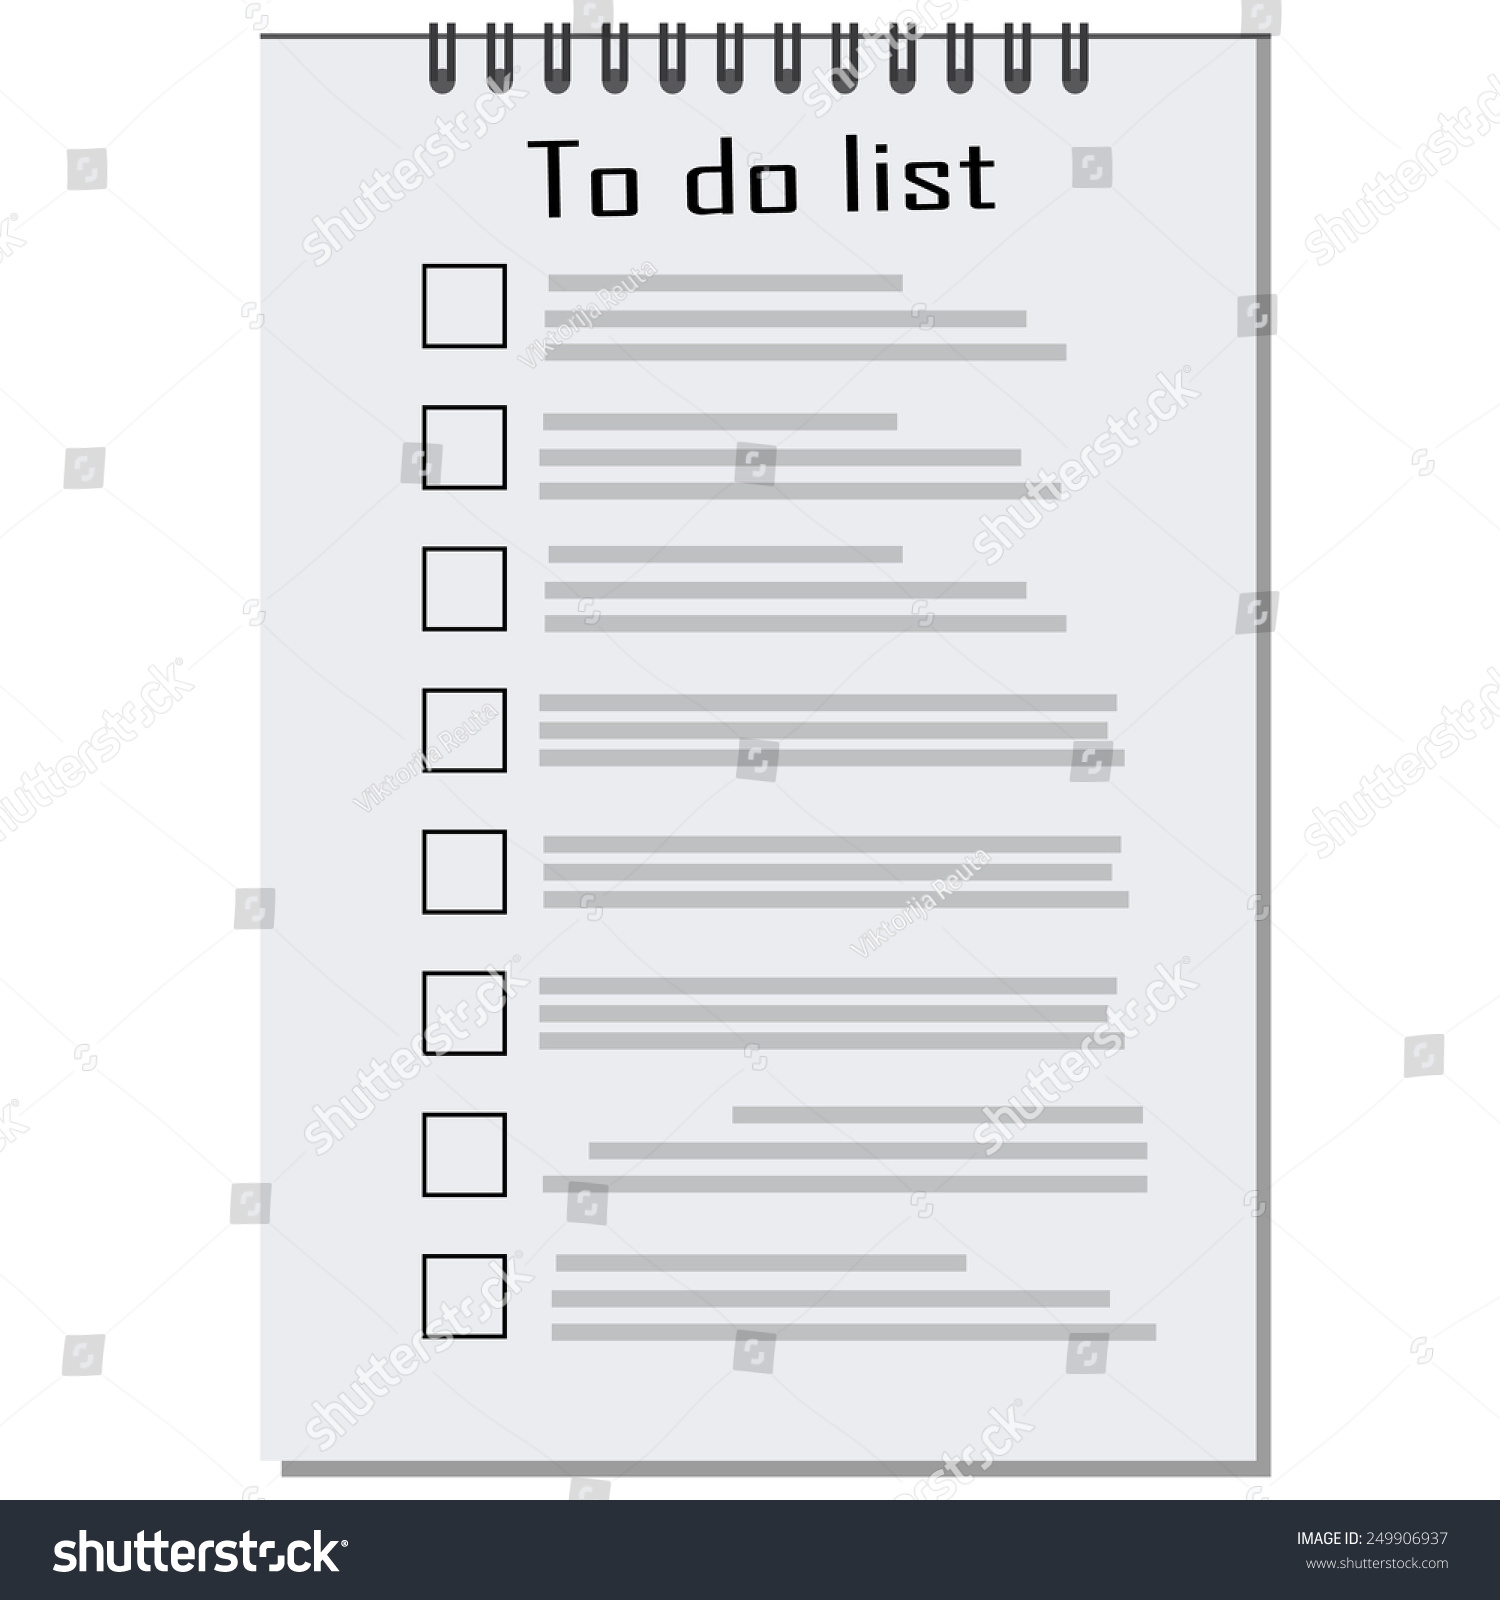 vector-list-with-checkboxes-icon-to-do-list-royalty-free-stock-vector-249906937-avopix